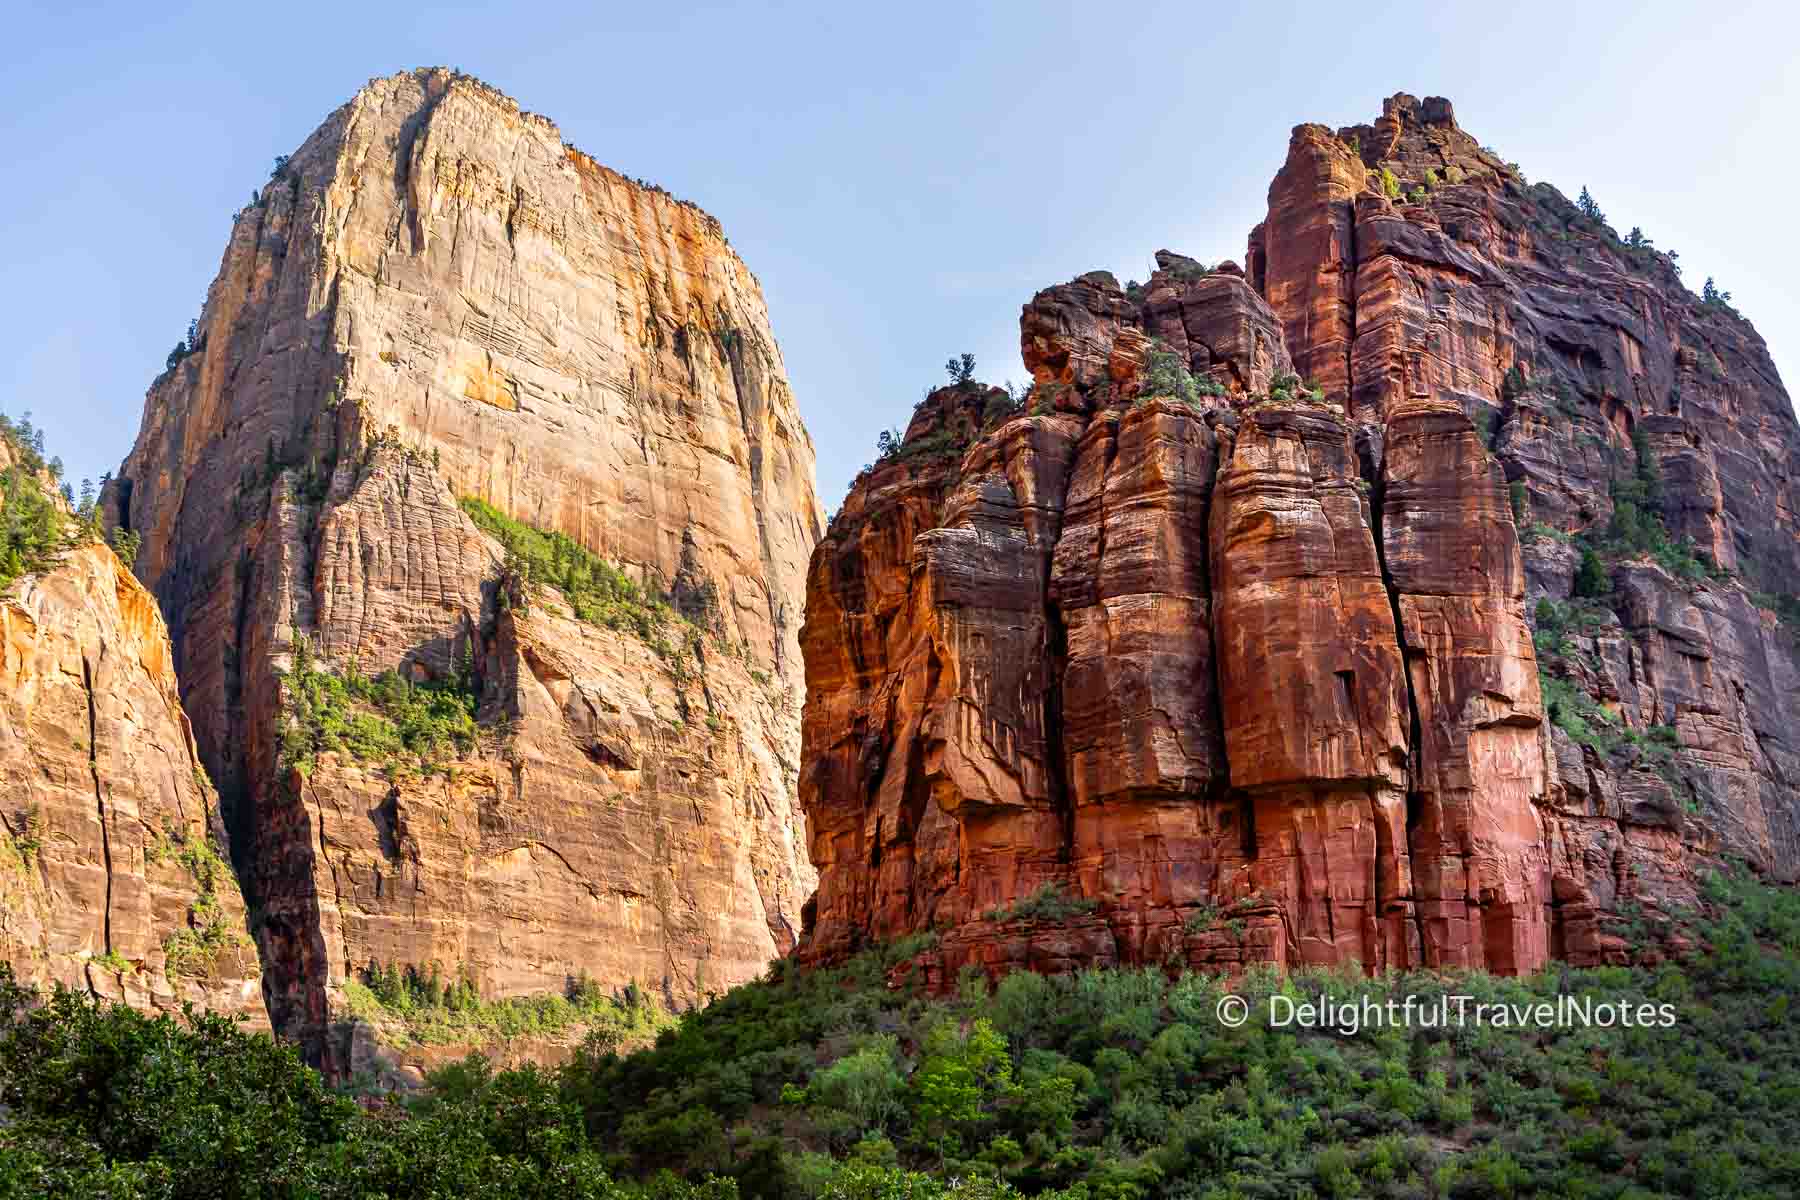 The Great White Throne and the Organ at Zion National Park in Utah.